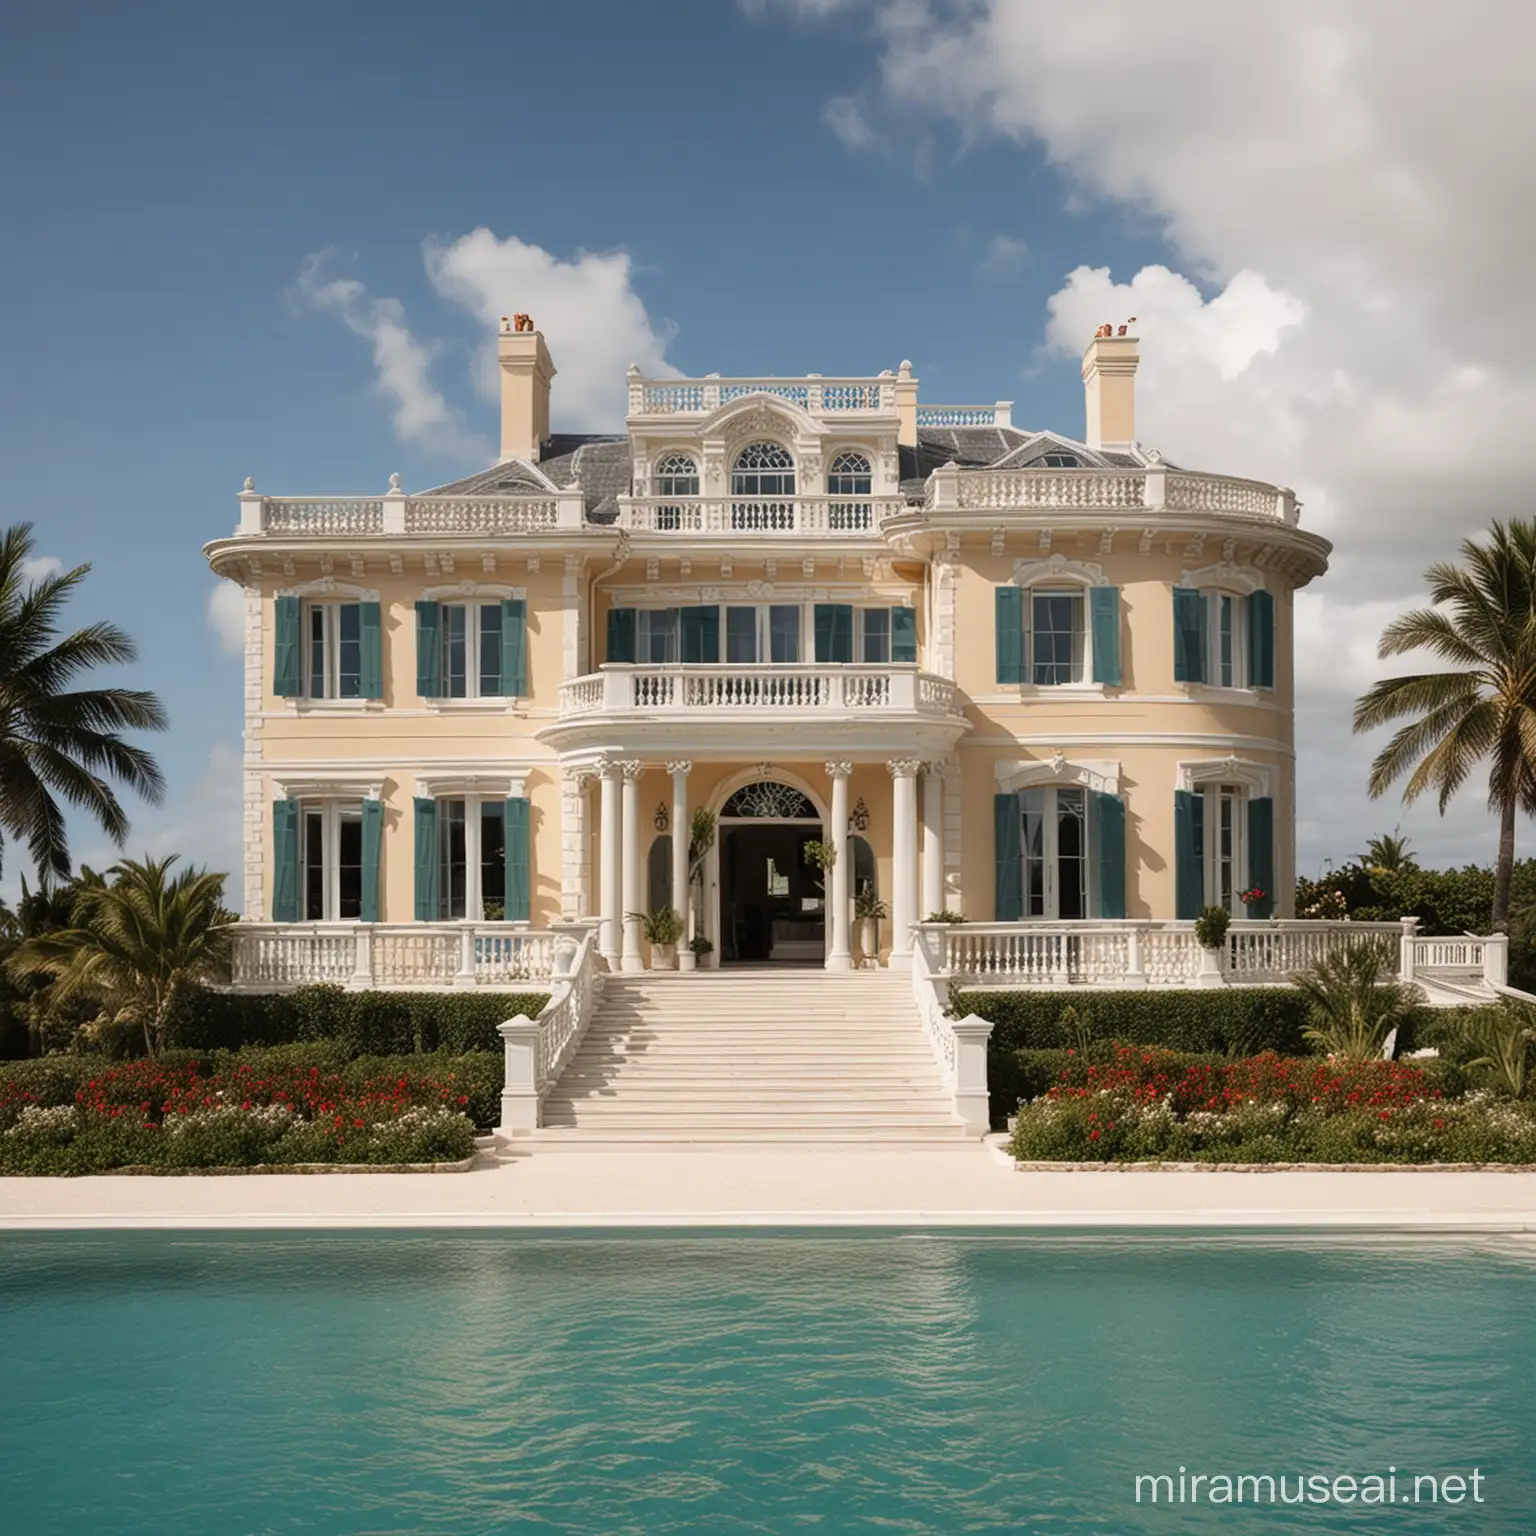 Luxurious TwoStory Island Mansion Opulent Architecture and Surrounding Natural Beauty